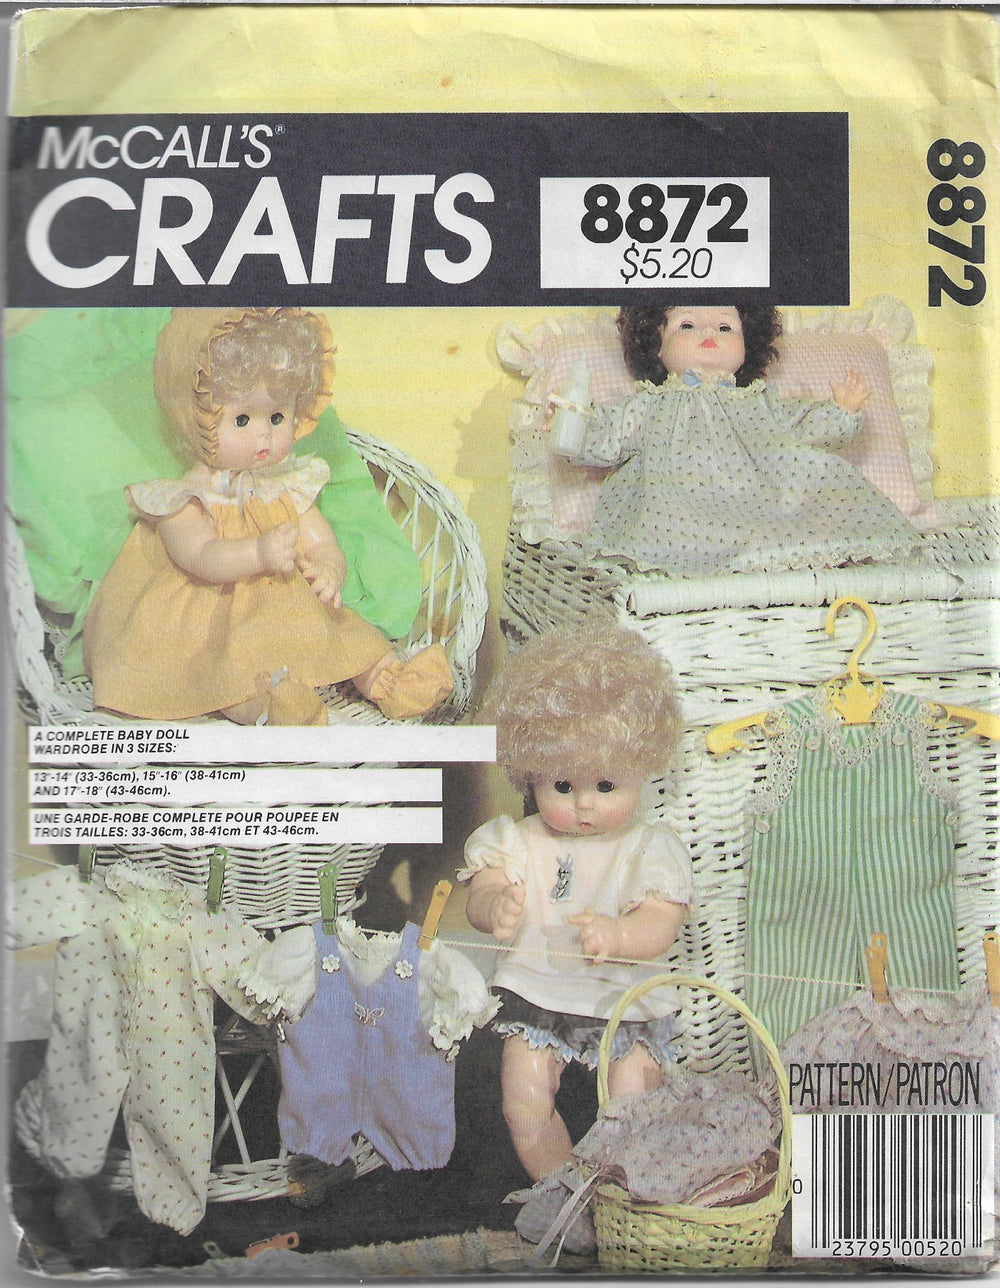 mccalls 8872 doll clothes vintage pattern